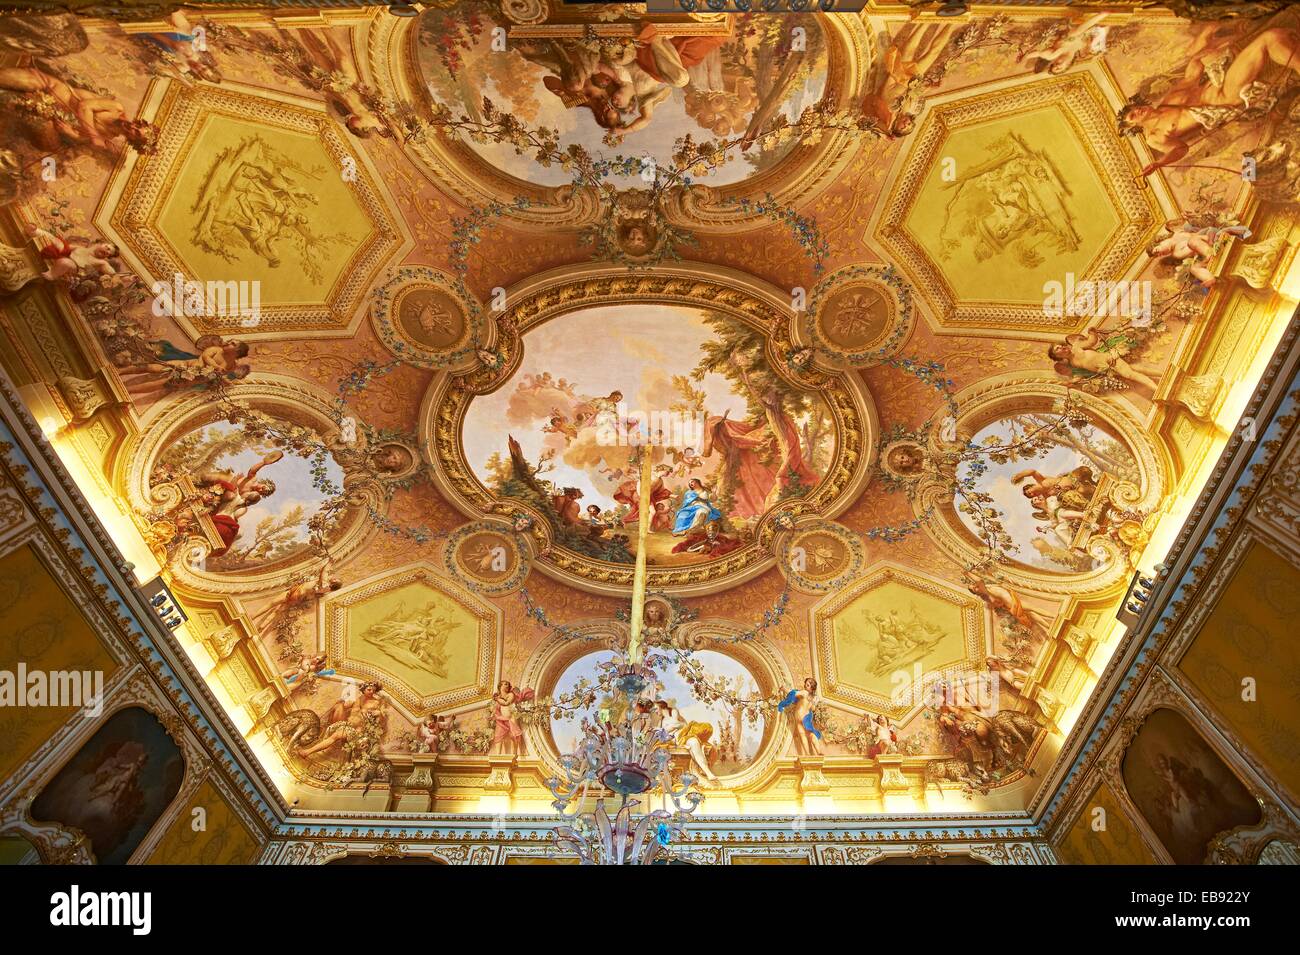 The Autumn Room- Frescoes on the vaulted ceiling depict the meetingbetween Bacchus and Ariadne by Antonio de Dominici  Over the Stock Photo